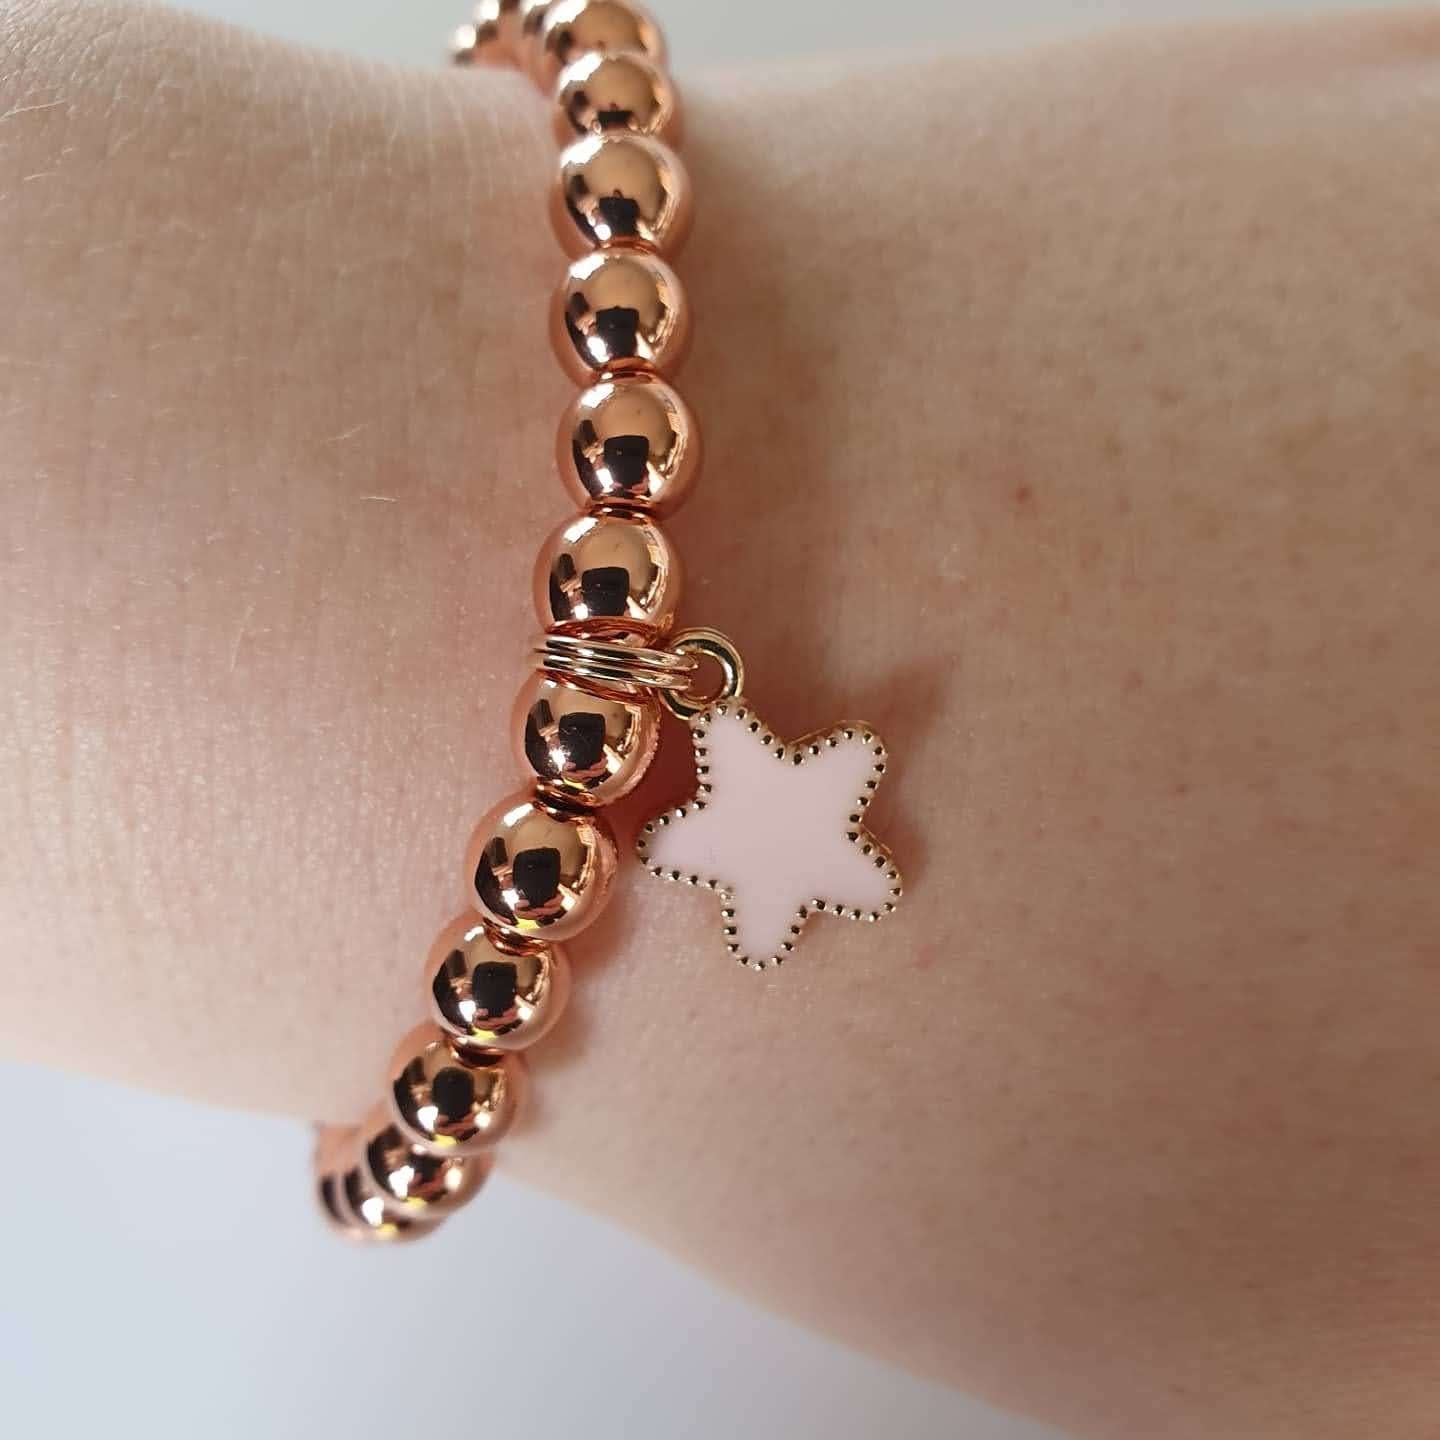 This is a picture of a rose gold bracelet with a star charm on a wrist